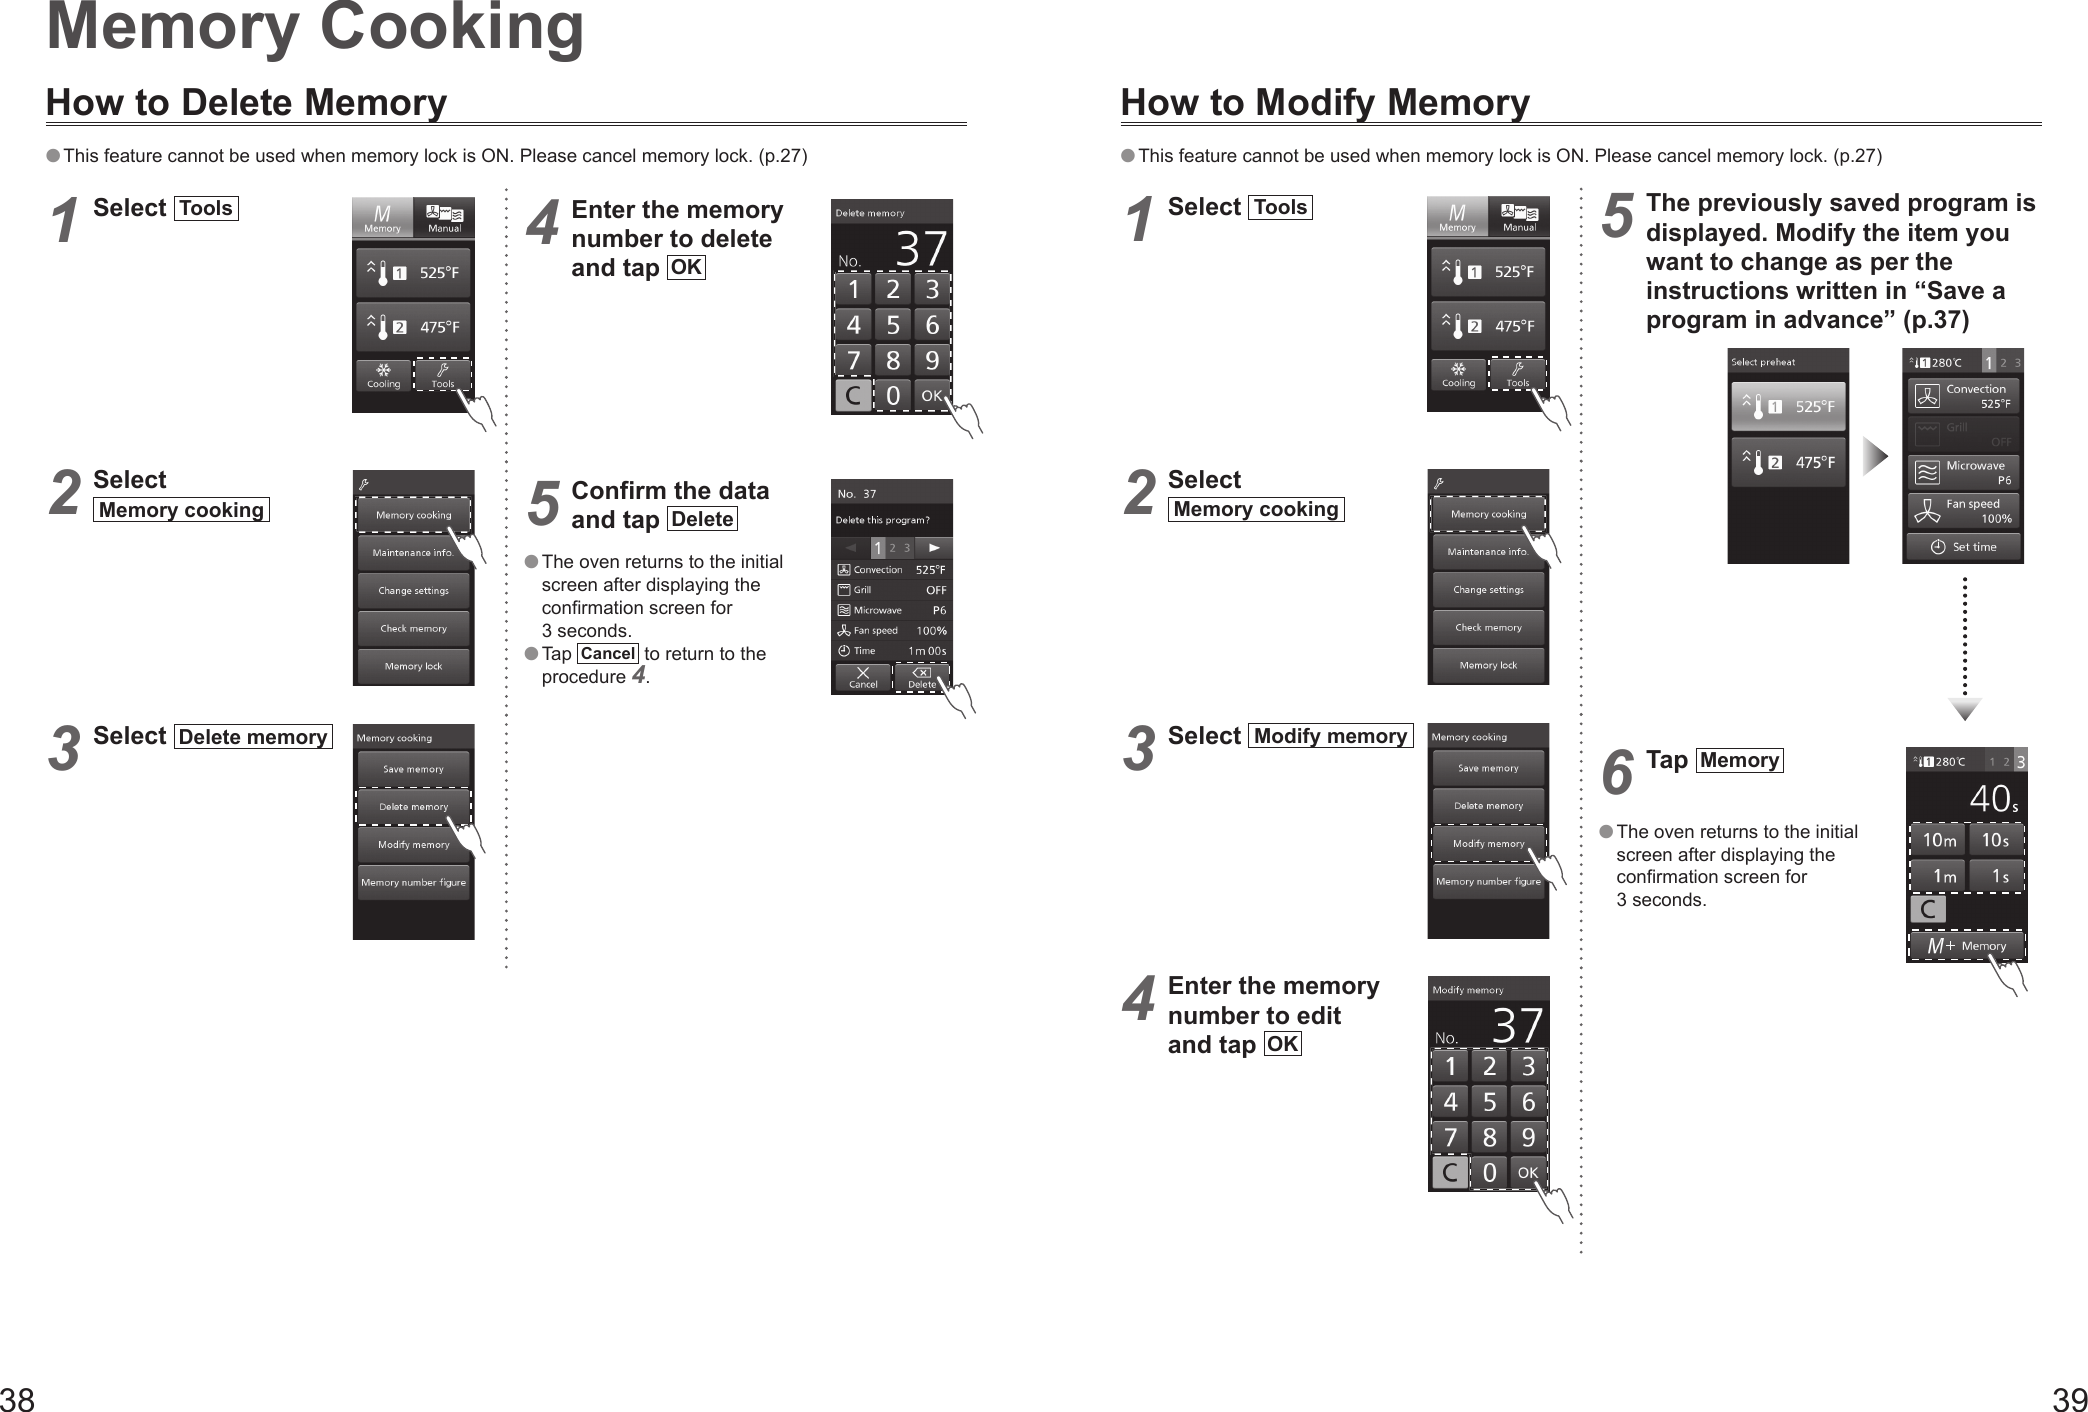 38 39Memory CookingHow to Delete Memory This feature cannot be used when memory lock is ON. Please cancel memory lock. (p.27)1 Select  Tools  2 Select Memory cooking  3 Select  Delete memory  4 Enter the memory number to delete  and tap  OK 5 Confirm the data  and tap  Delete  The oven returns to the initial screen after displaying the confirmation screen for 3 seconds. Tap  Cancel  to return to the procedure 4.How to Modify Memory This feature cannot be used when memory lock is ON. Please cancel memory lock. (p.27)1 Select  Tools  2 Select Memory cooking  3 Select  Modify memory  4 Enter the memory number to edit  and tap  OK 5 The previously saved program is displayed. Modify the item you want to change as per the instructions written in “Save a program in advance” (p.37)6 Tap  Memory    The oven returns to the initial screen after displaying the confirmation screen for 3 seconds.